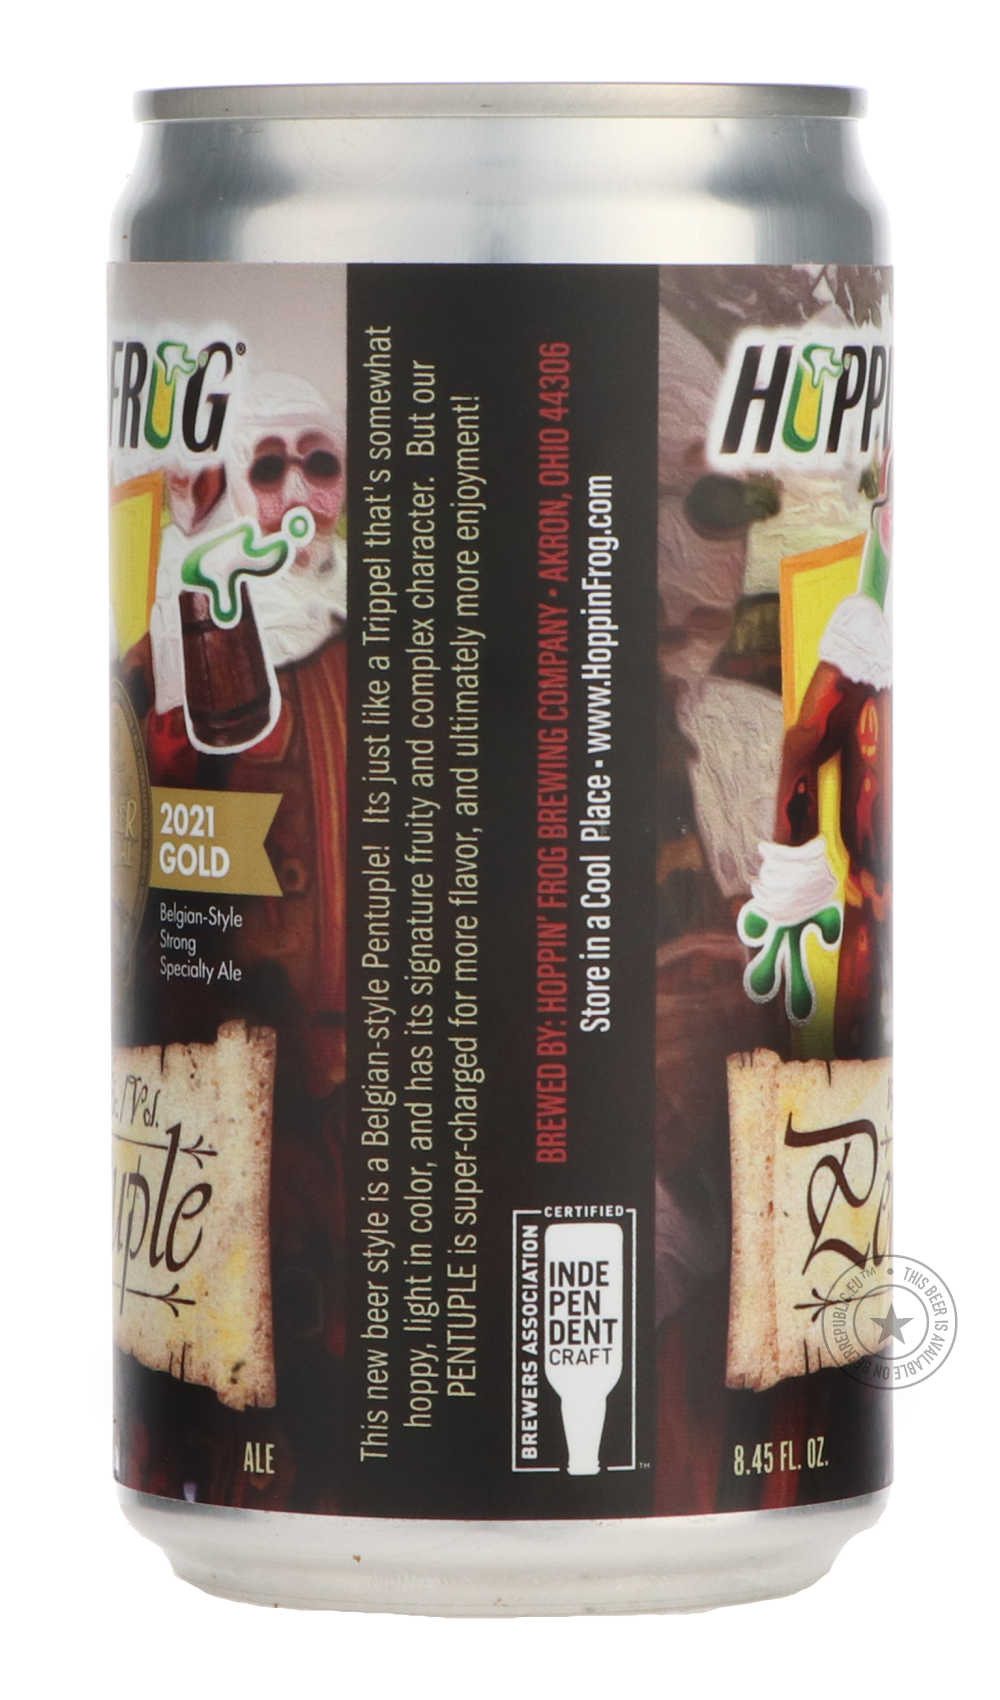 -Hoppin' Frog- Pentuple-Pale- Only @ Beer Republic - The best online beer store for American & Canadian craft beer - Buy beer online from the USA and Canada - Bier online kopen - Amerikaans bier kopen - Craft beer store - Craft beer kopen - Amerikanisch bier kaufen - Bier online kaufen - Acheter biere online - IPA - Stout - Porter - New England IPA - Hazy IPA - Imperial Stout - Barrel Aged - Barrel Aged Imperial Stout - Brown - Dark beer - Blond - Blonde - Pilsner - Lager - Wheat - Weizen - Amber - Barley W